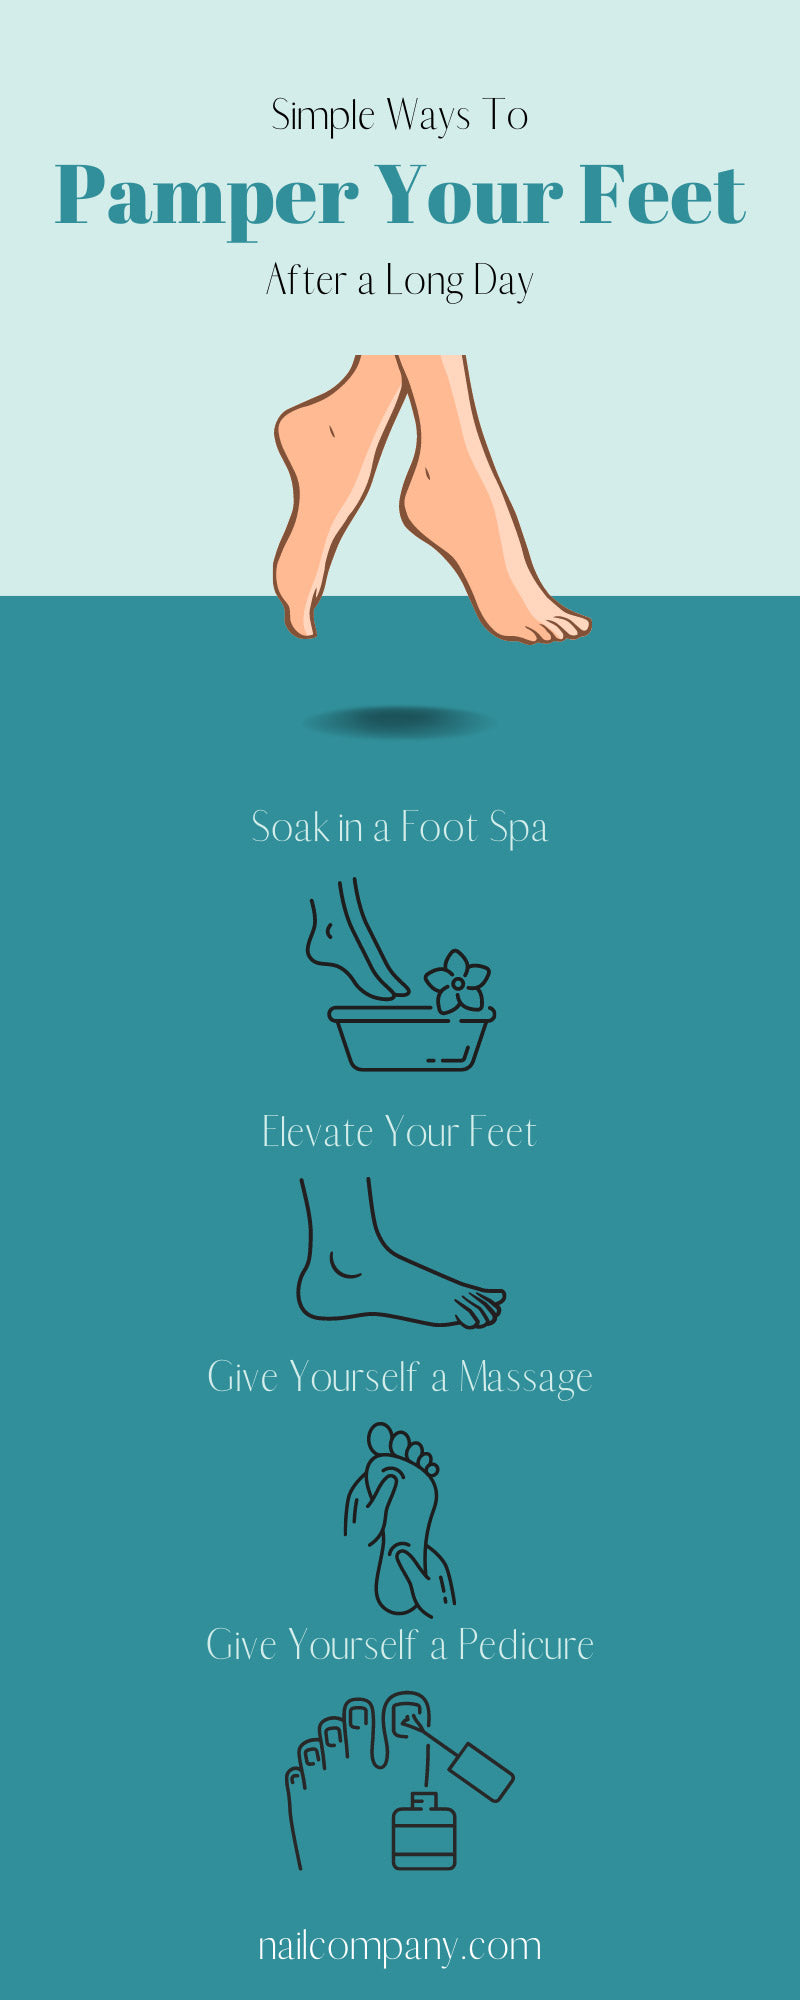 How to pamper your feet!